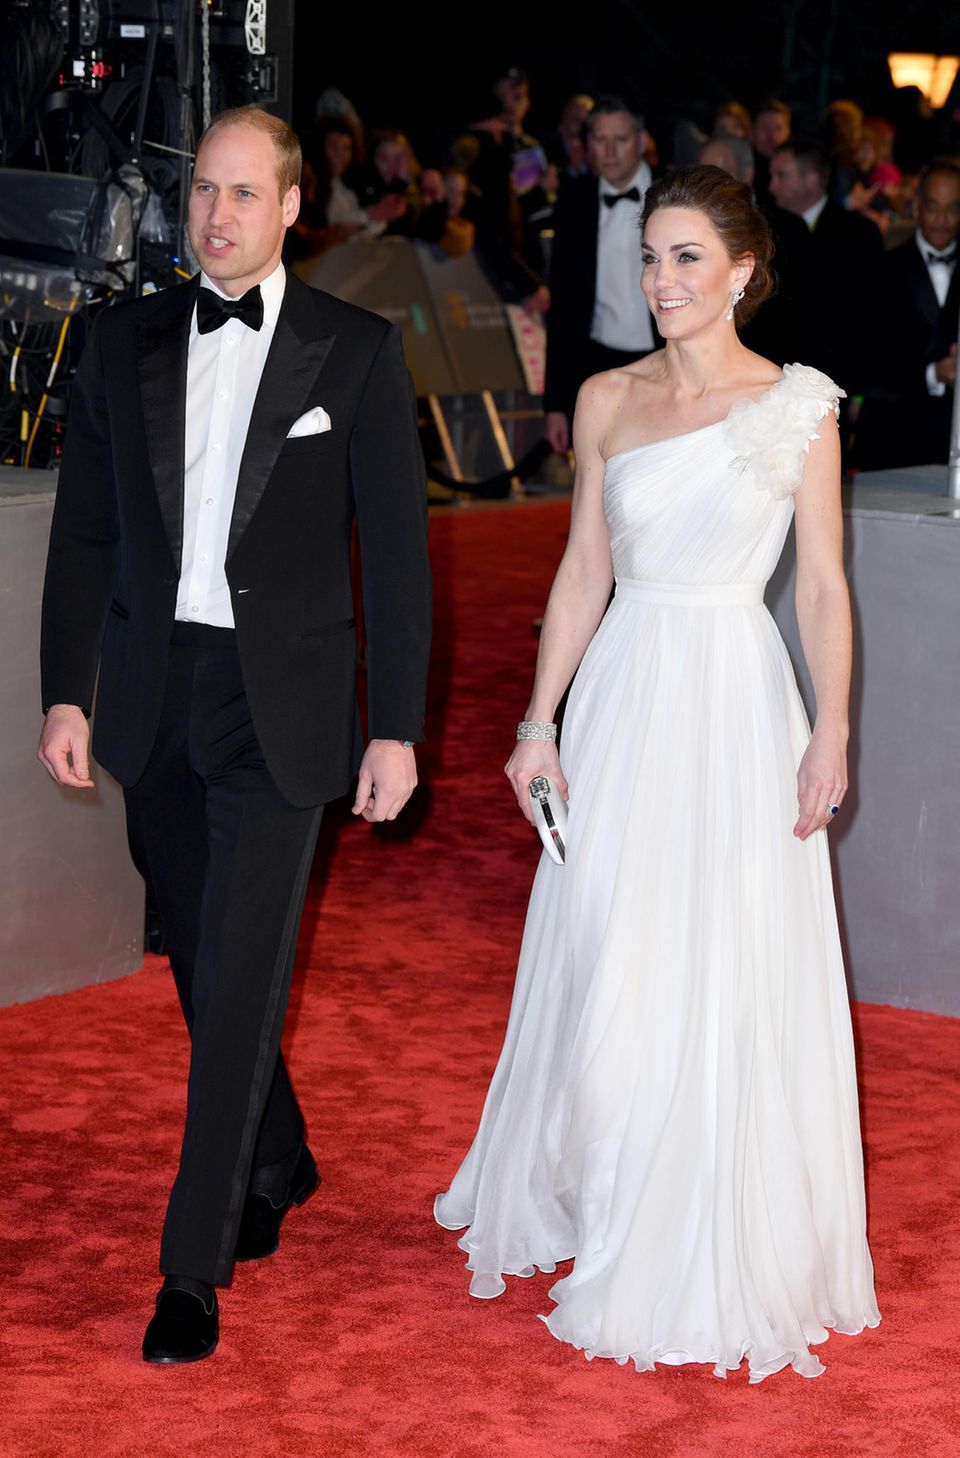 At the Bafta Awards, Duchess Catherine radiates pure elegance and shows an unusual amount of skin.